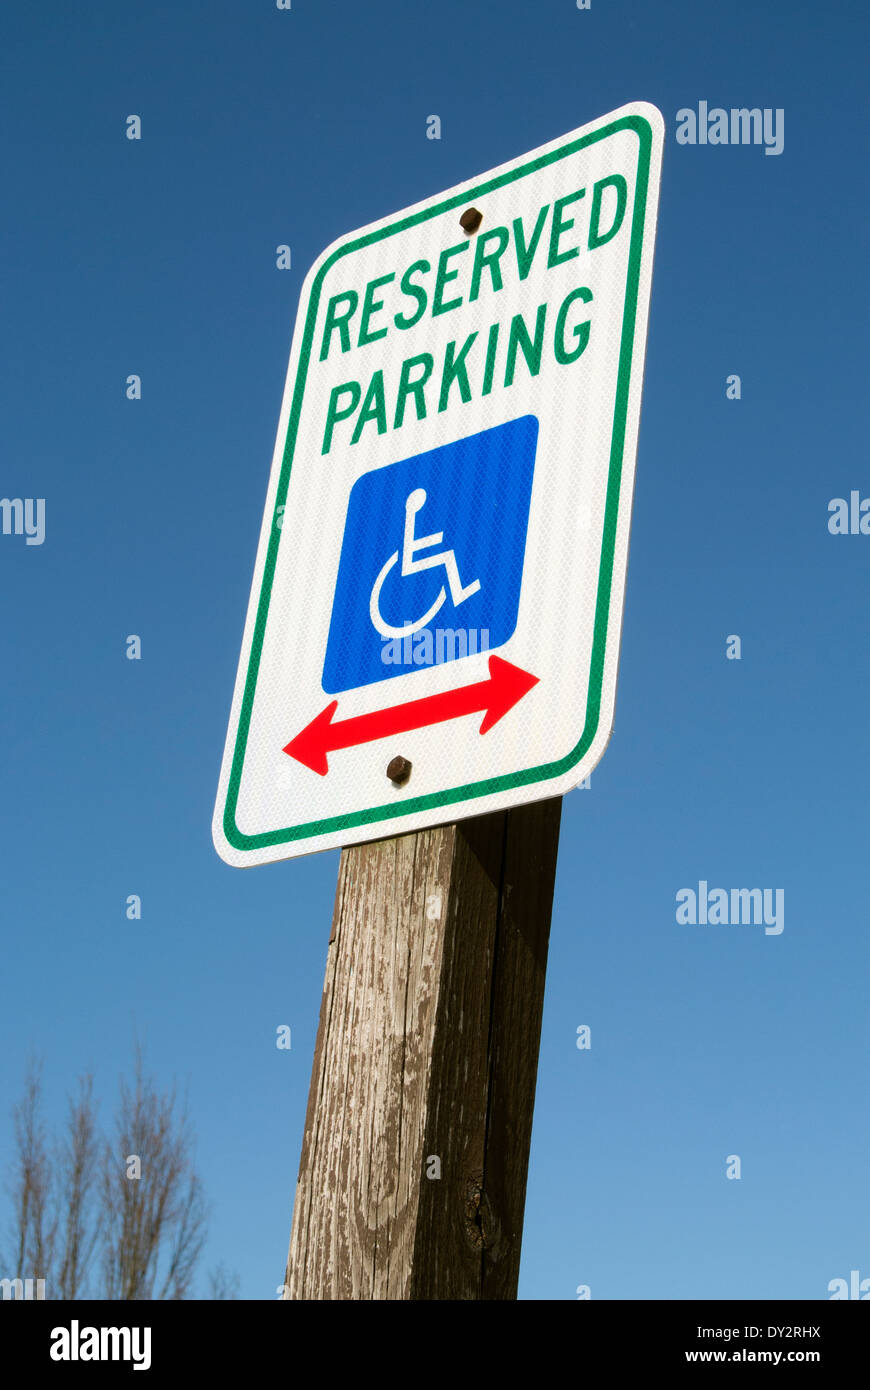 Reserved parking sign. Stock Photo